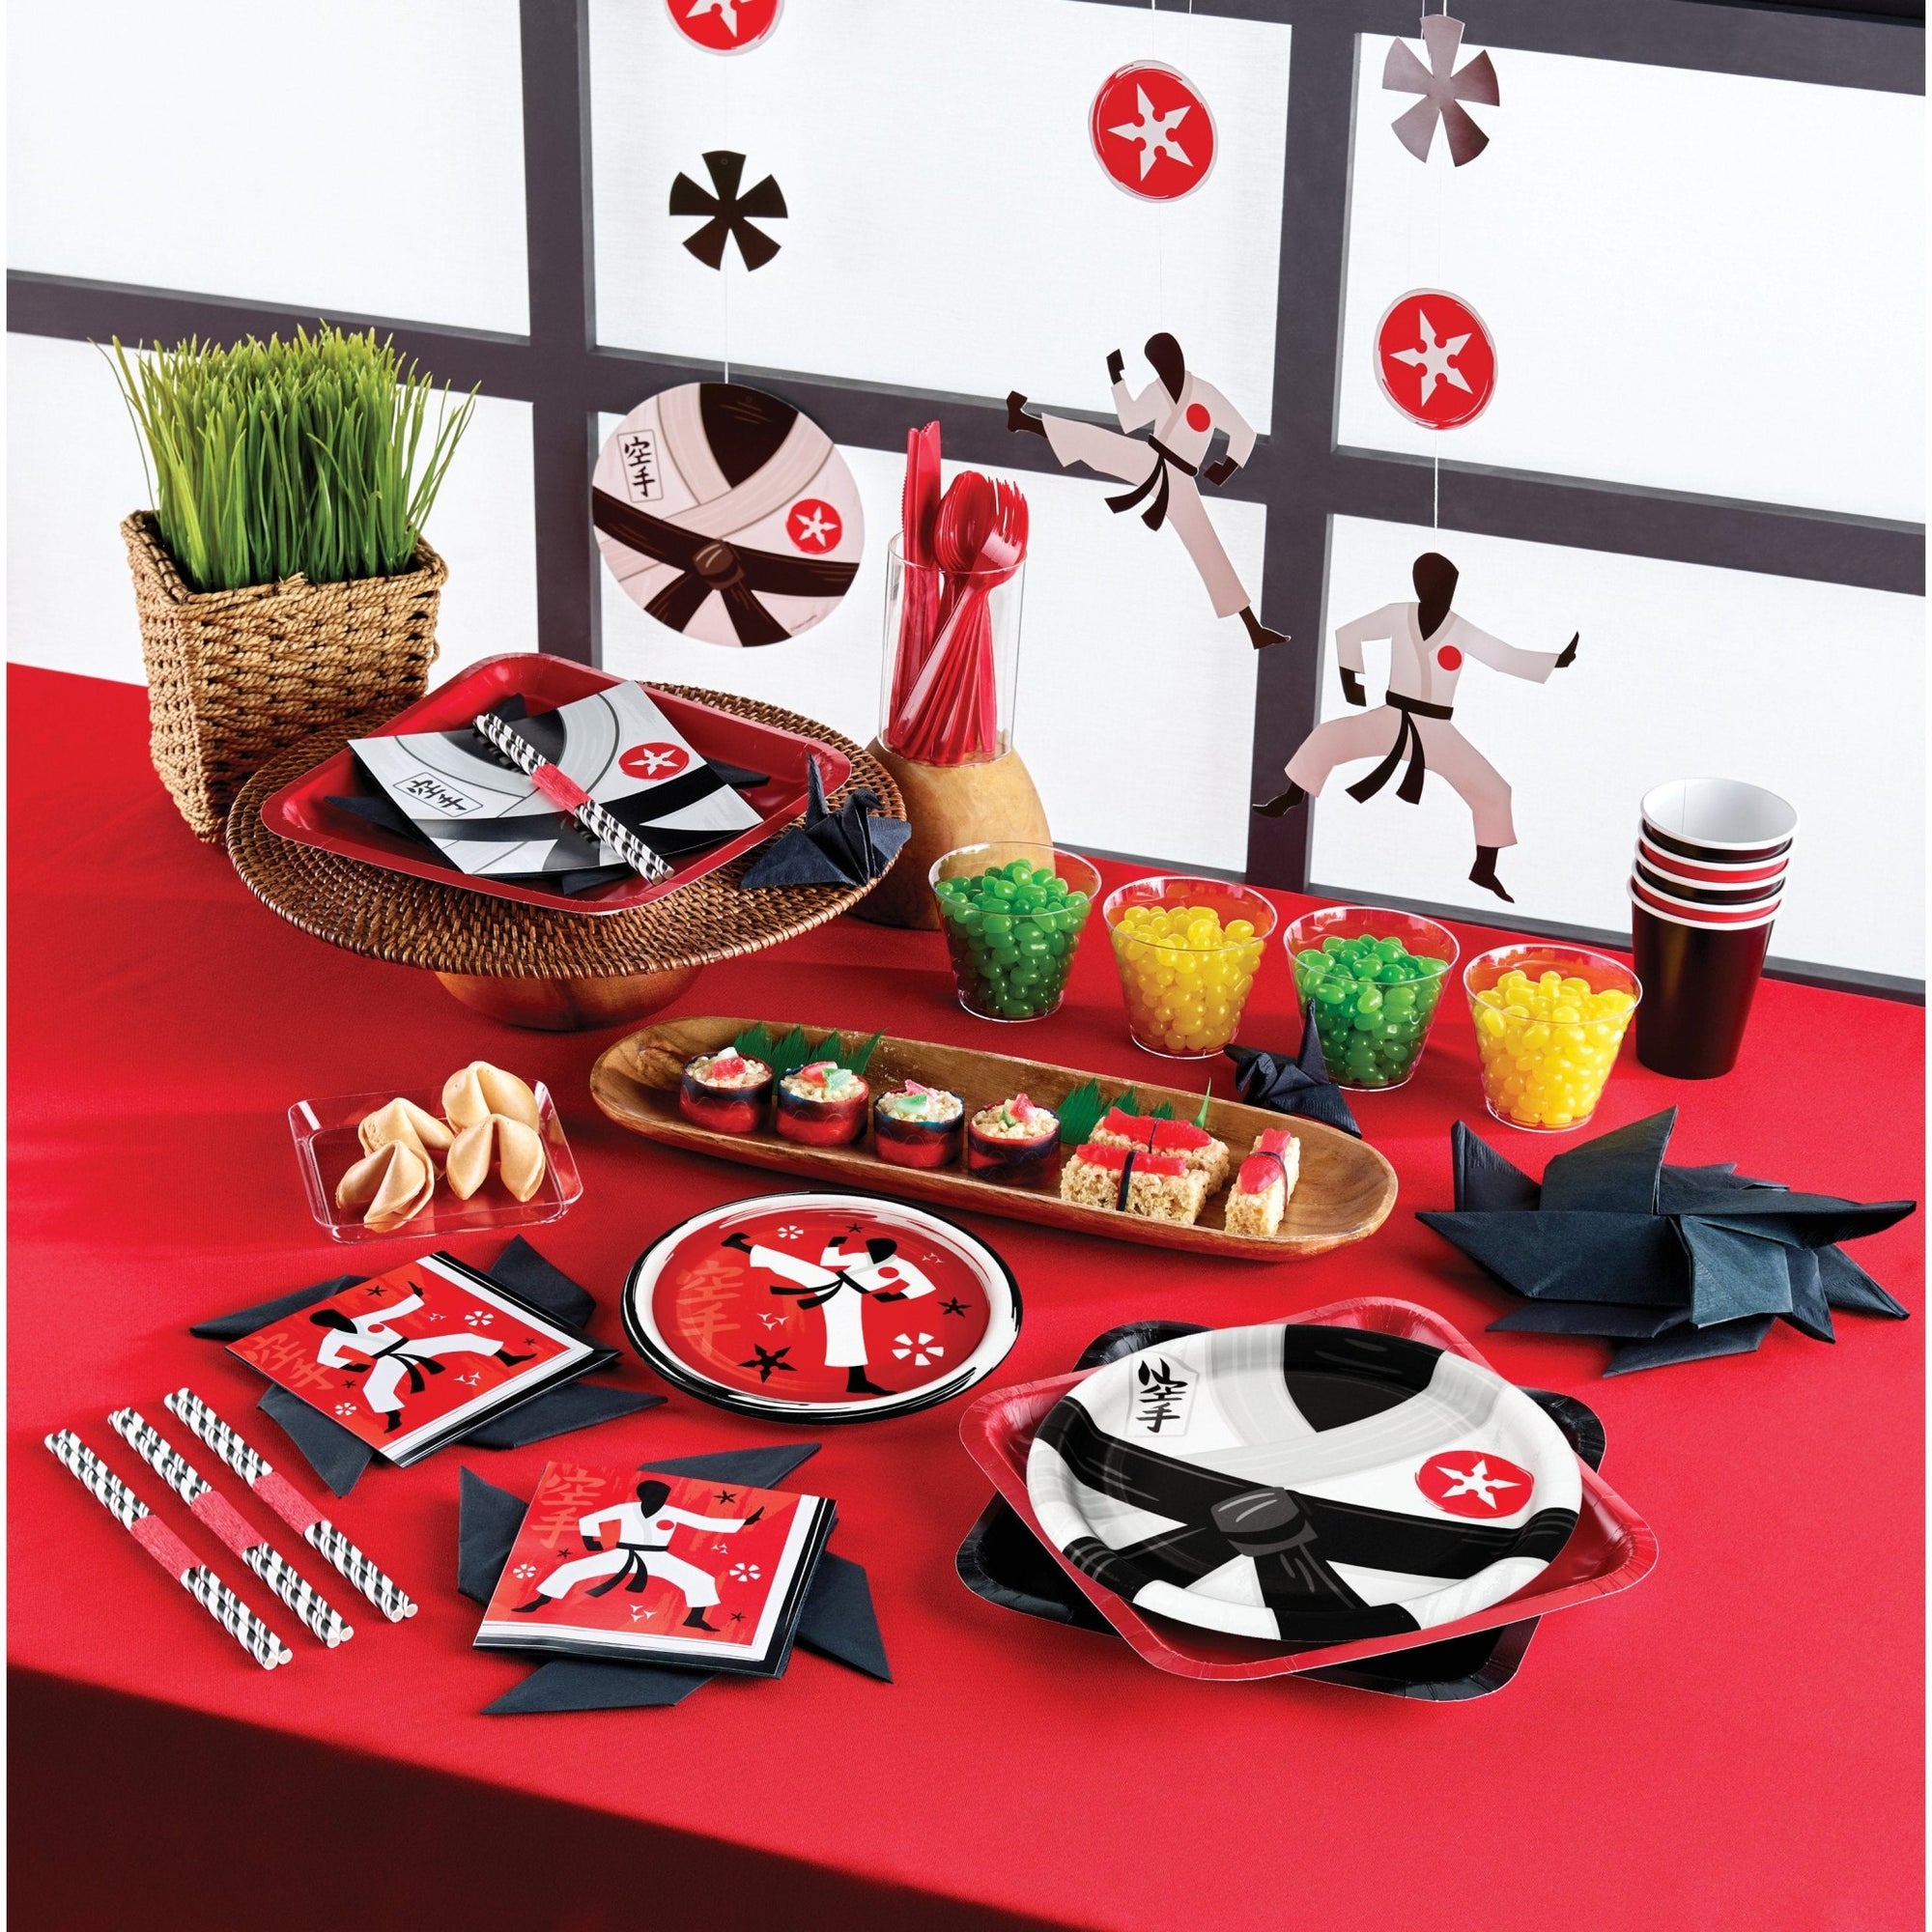 https://cdn.shopify.com/s/files/1/0071/1222/8927/products/karate-themed-party-plates-698408_2000x.jpg?v=1691028043